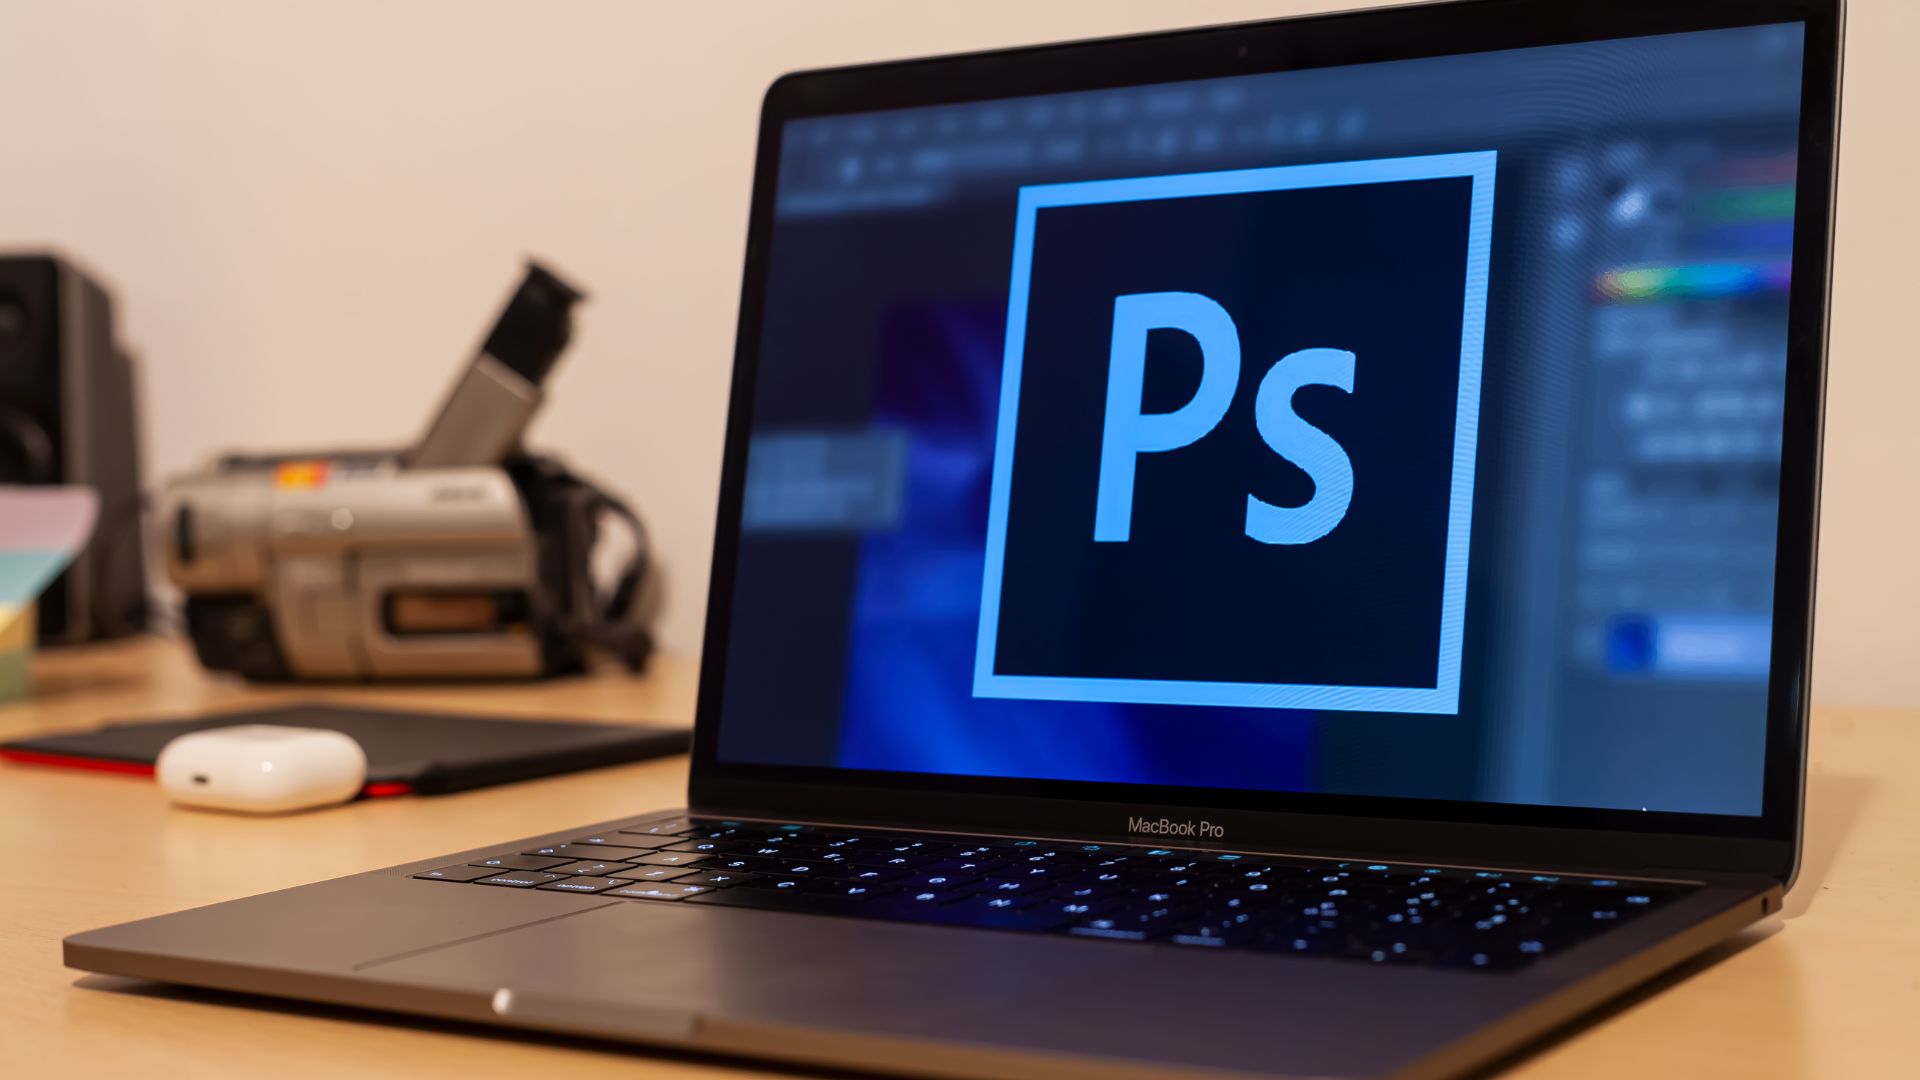 Laptop sitting on a desk. The screen shows the Photoshop logo